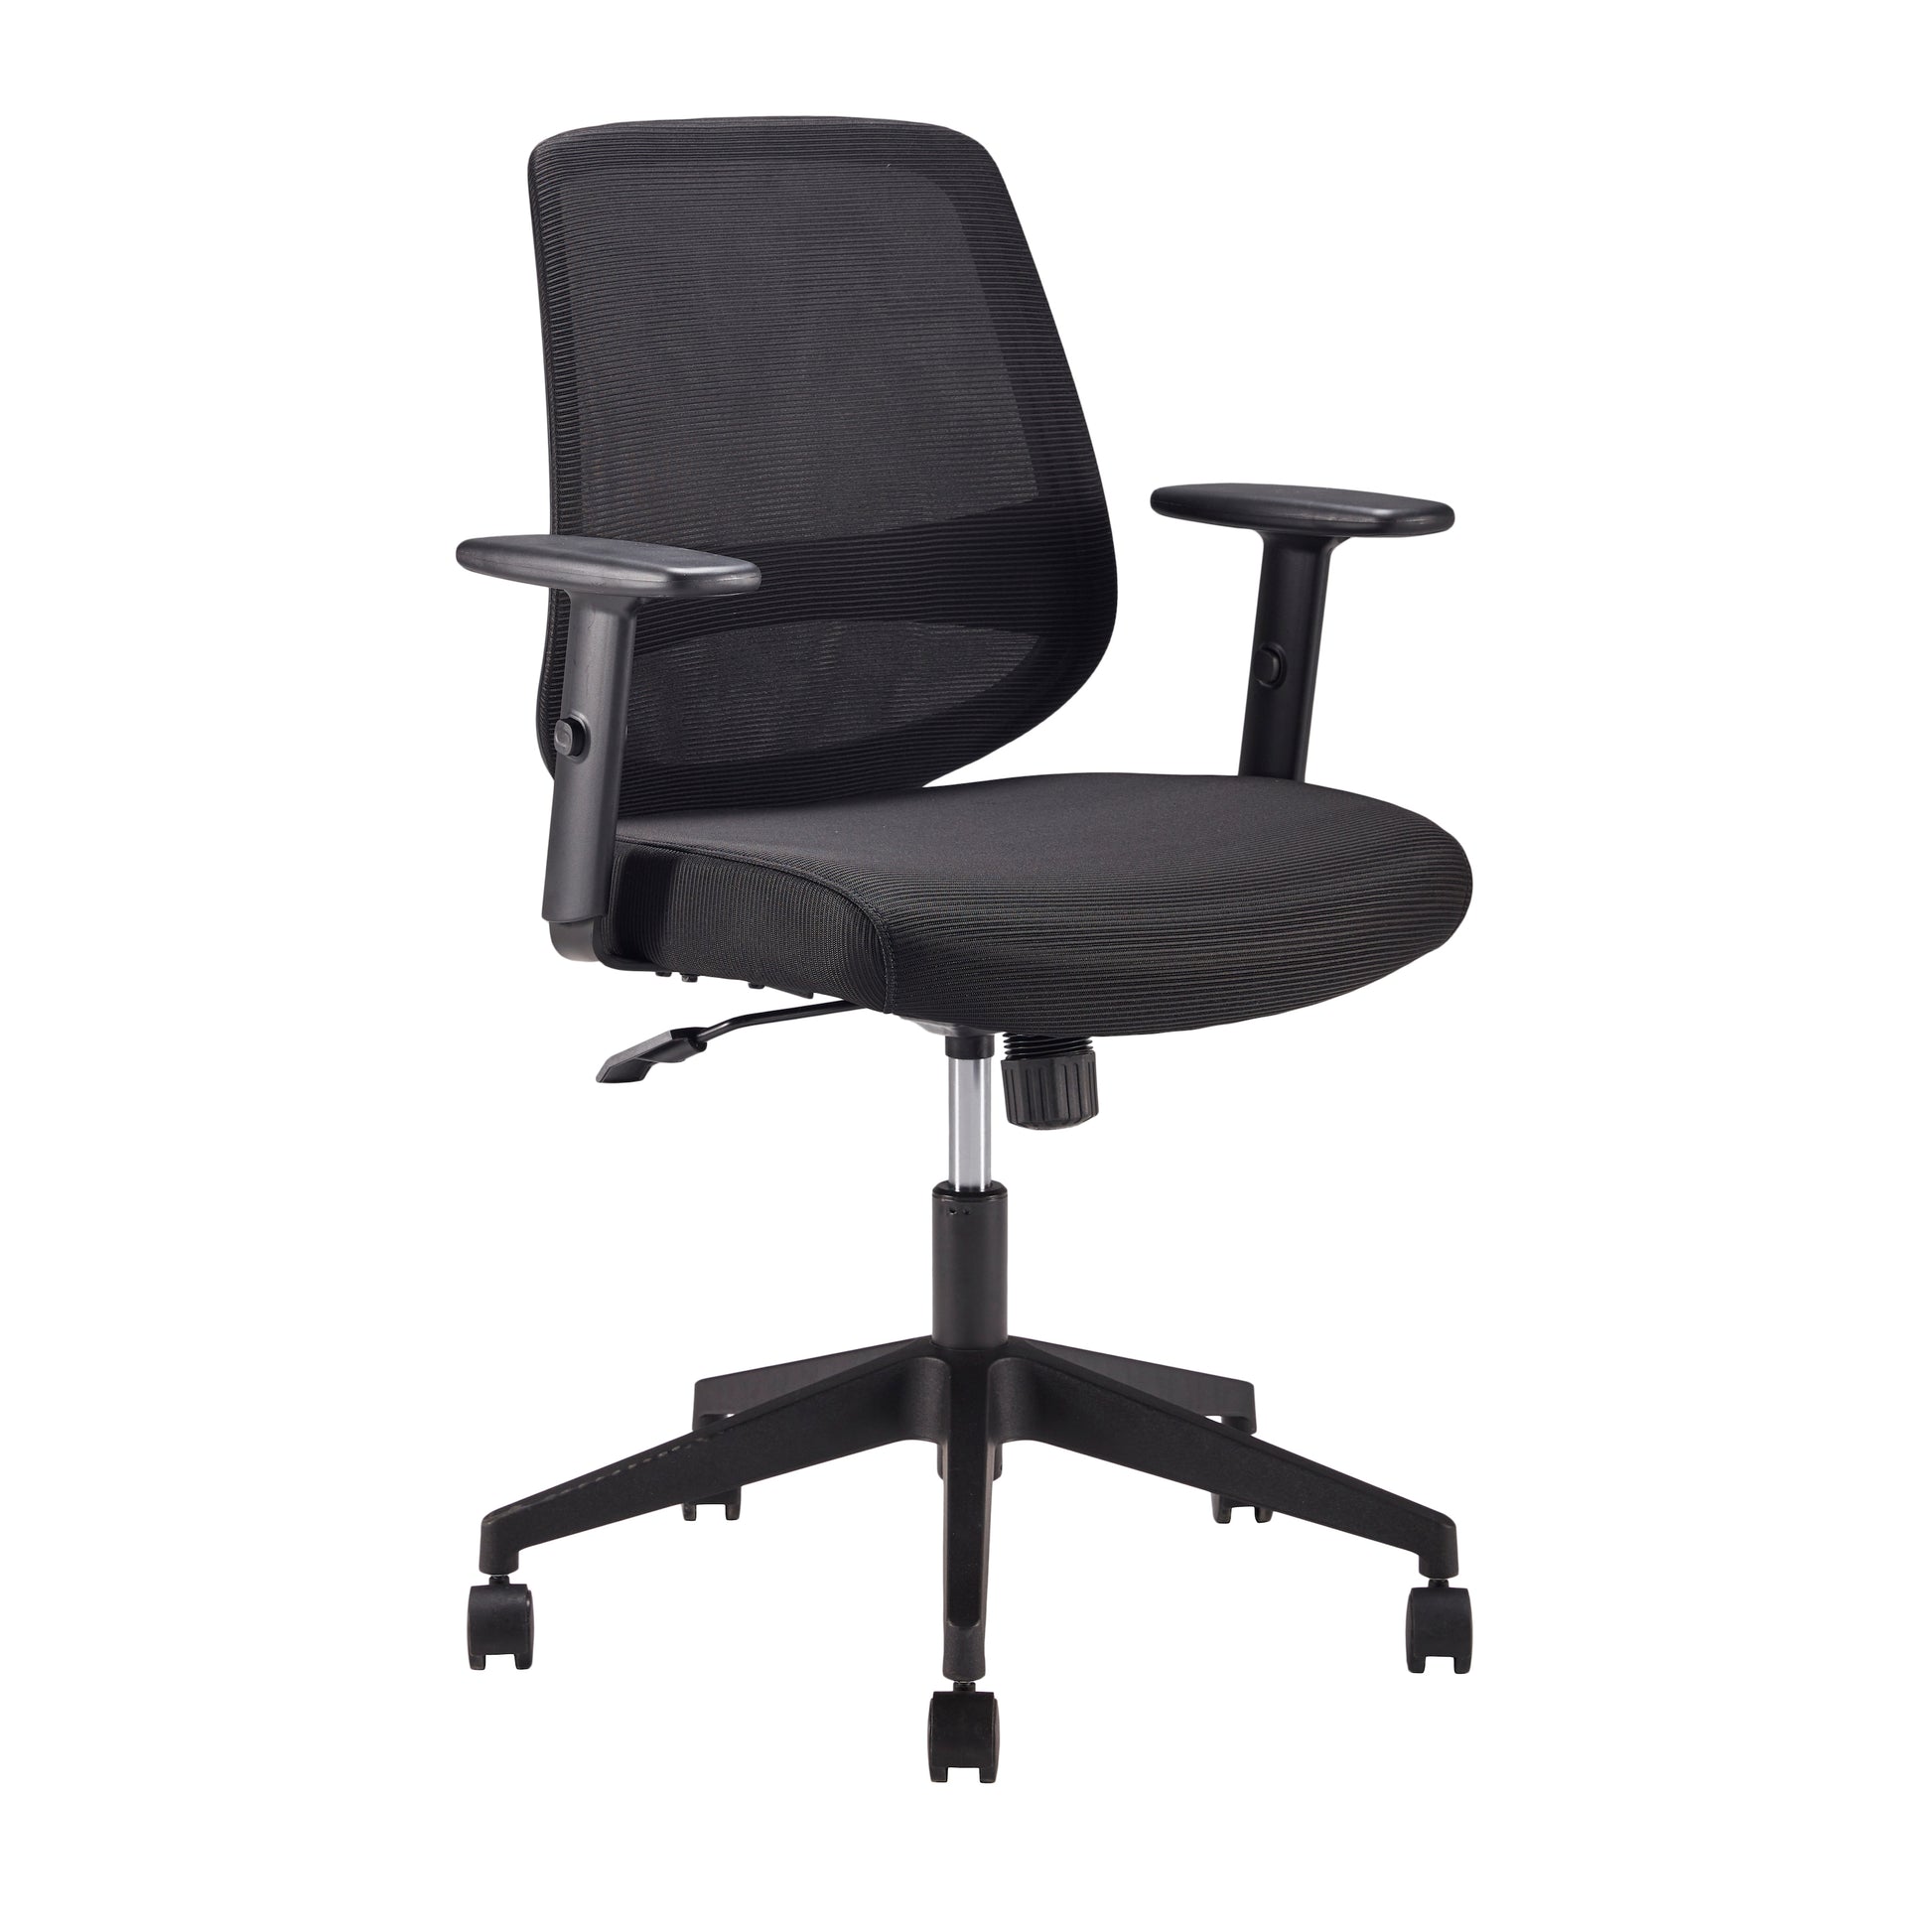 Shield Office Chair - Task Chair | Tollo.co.uk  